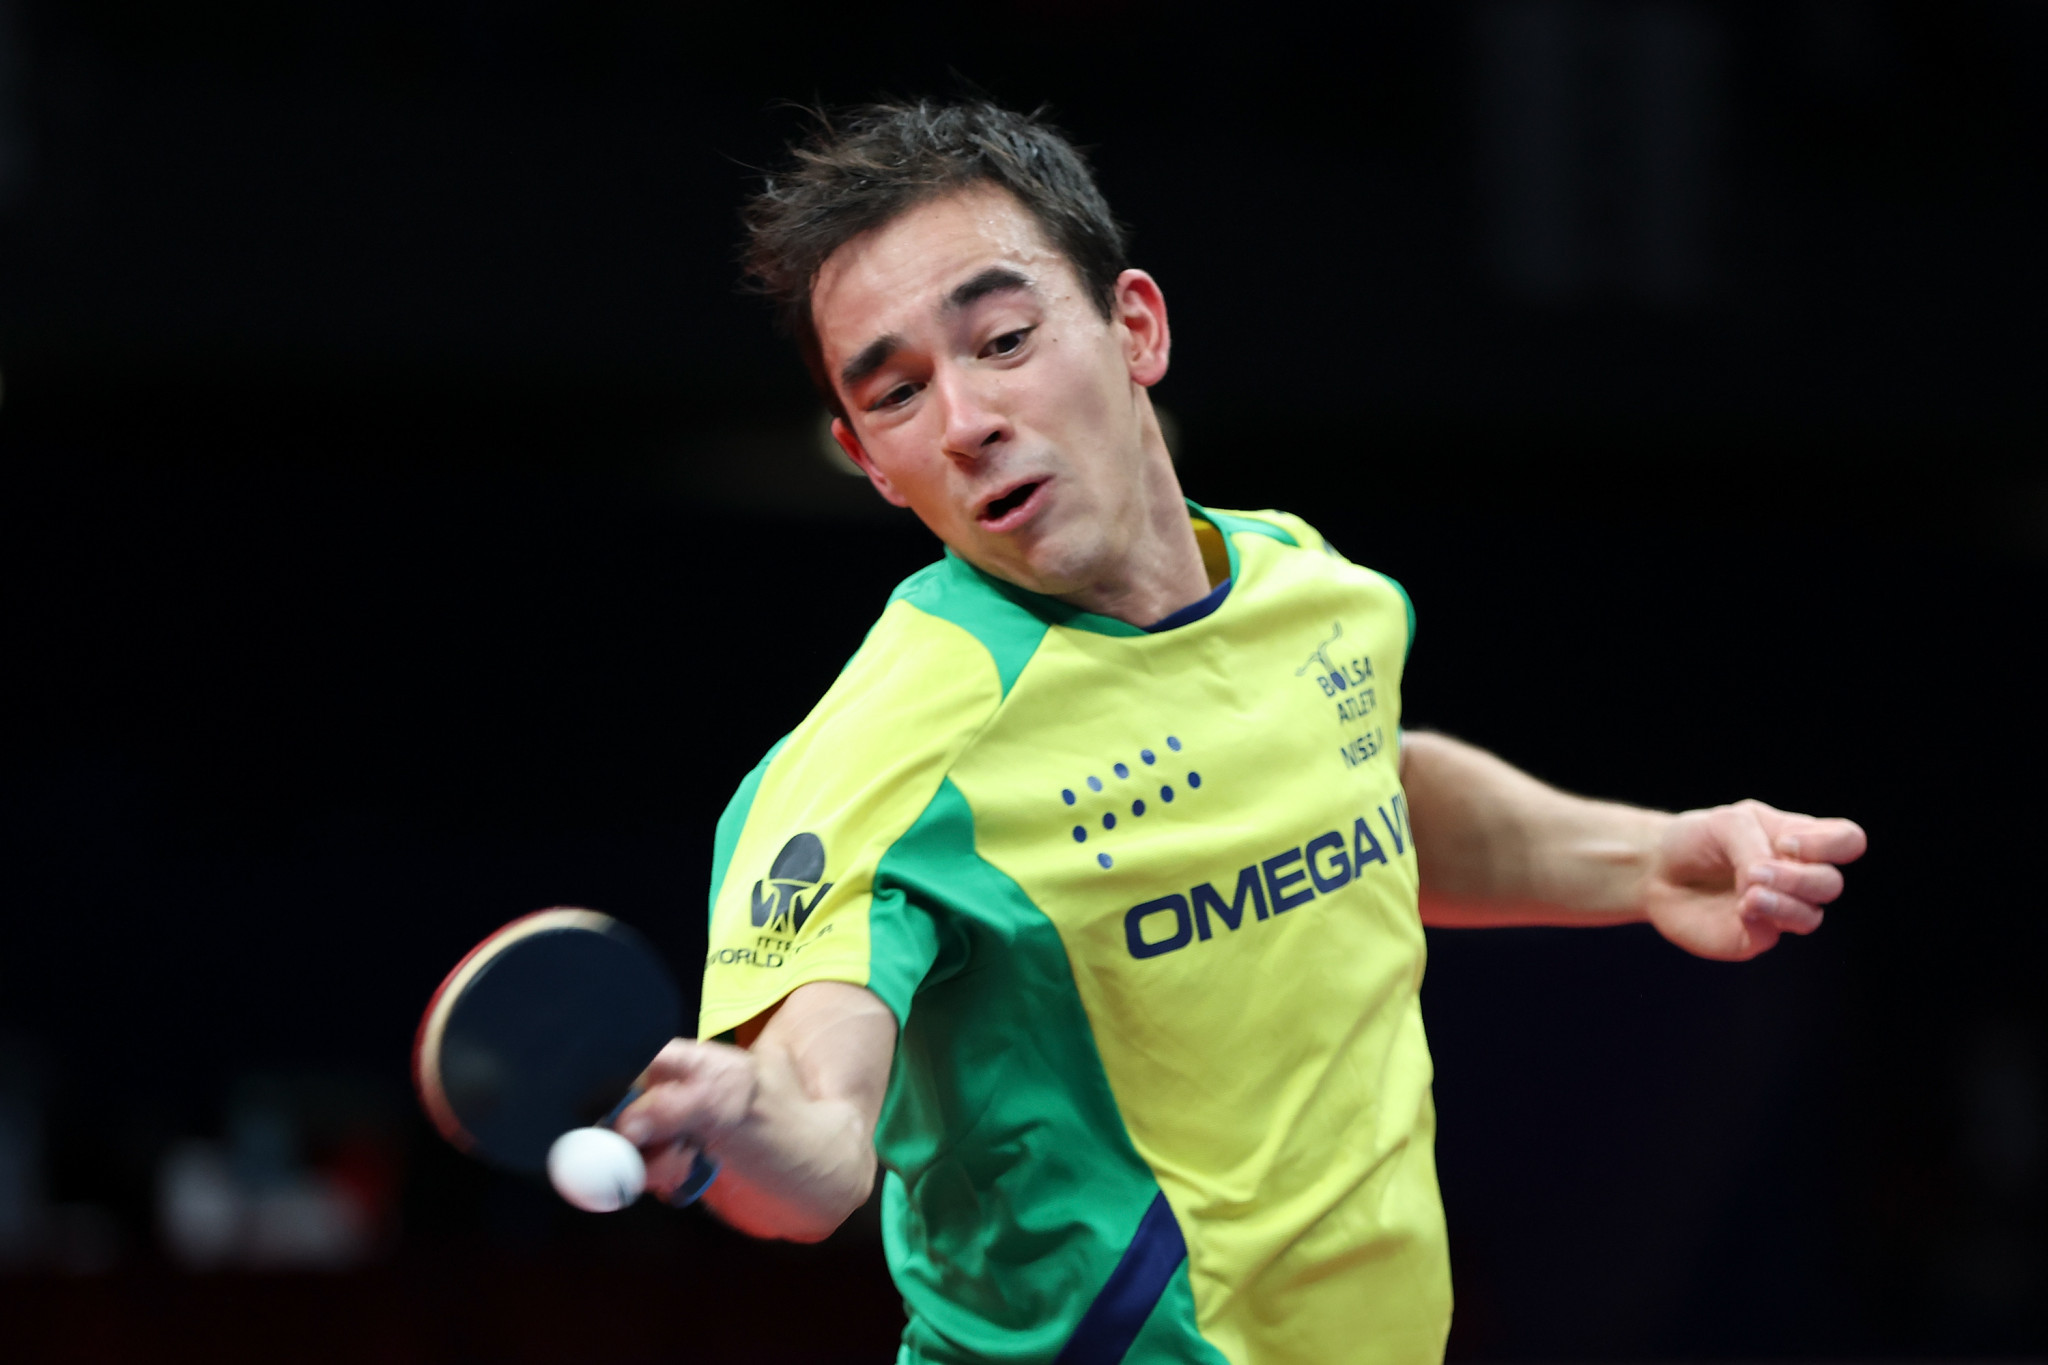 Brazil's Hugo Calderano defeated Canada's Eugene Wang 4-2 in the ITTF Pan American Championships men's singles final ©Getty Images